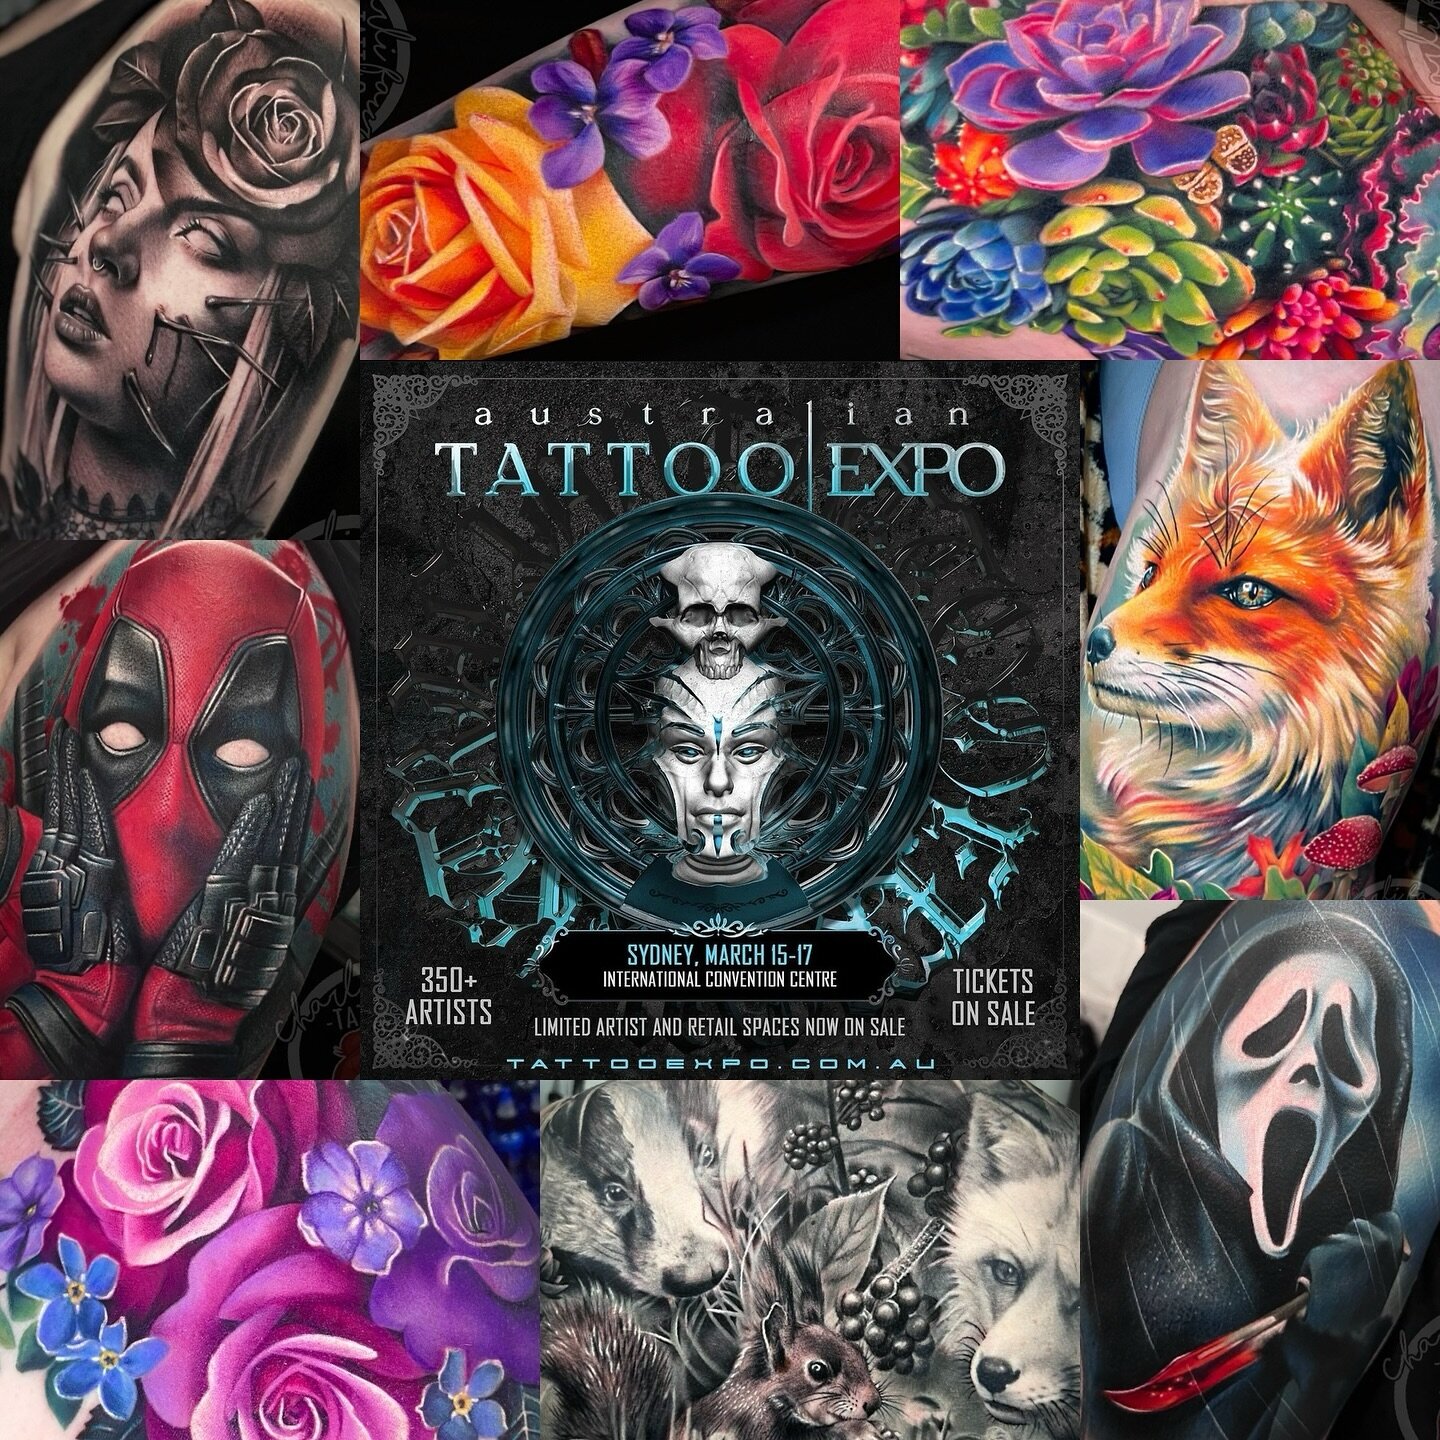 Heyo! I&rsquo;ll be tattooing at my first expo in 4 years!
I&rsquo;m so excited to be joining the artists attending the @austattooexpo in Sydney 15-17 March. 

I currently have the Friday and Sunday available to tattoo. If you&rsquo;re interested in 